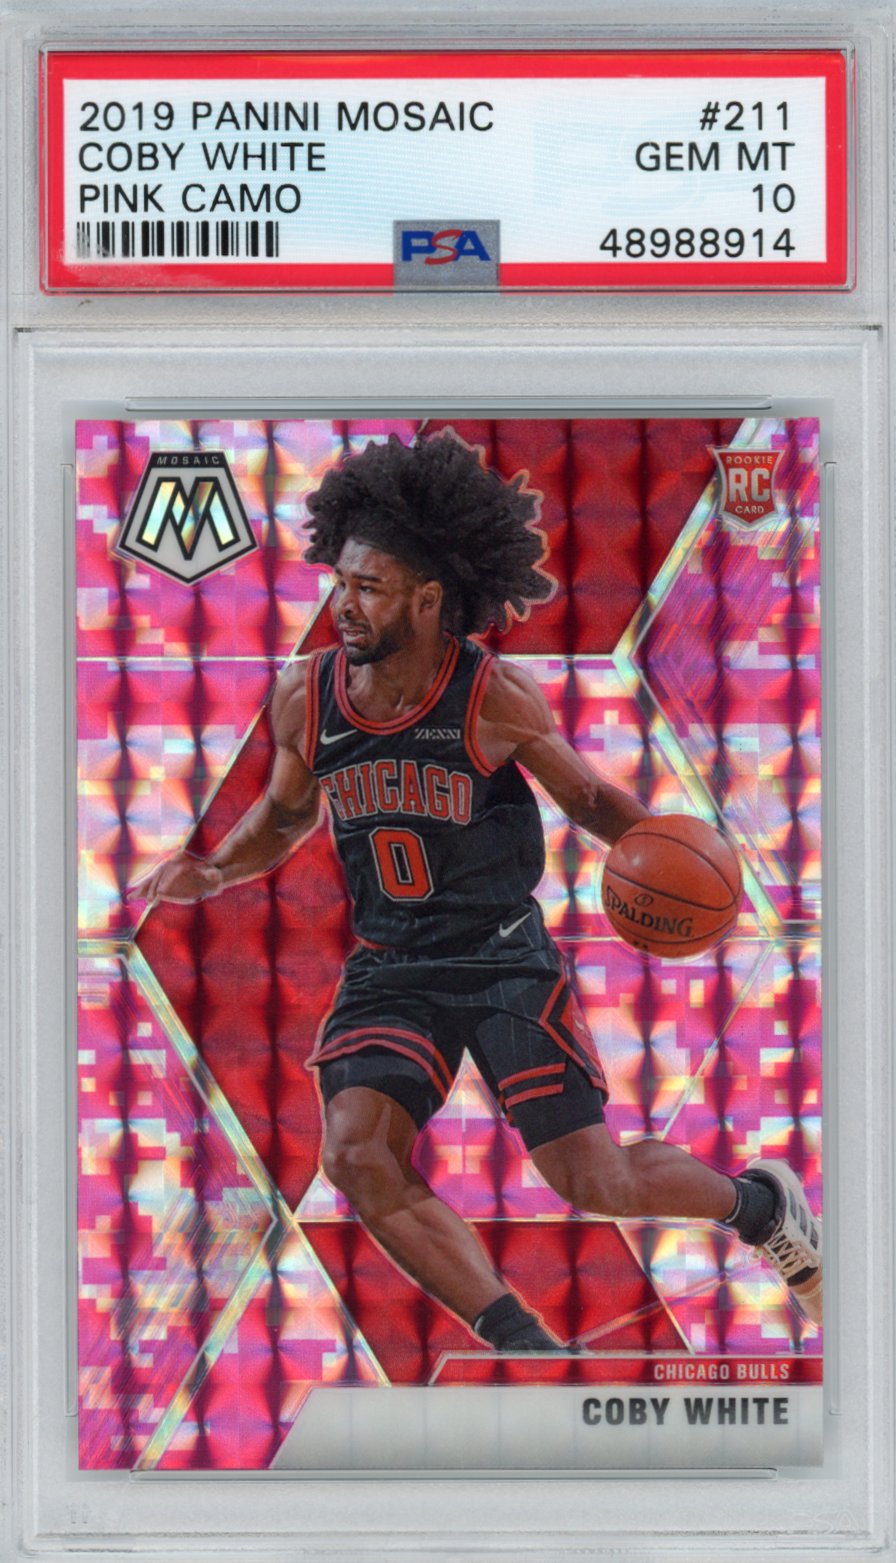 5X COBY WHITE BASKETBALL ROOKIE RC CARD LOT BULLS RATED PRIZM MOSAIC PANINI